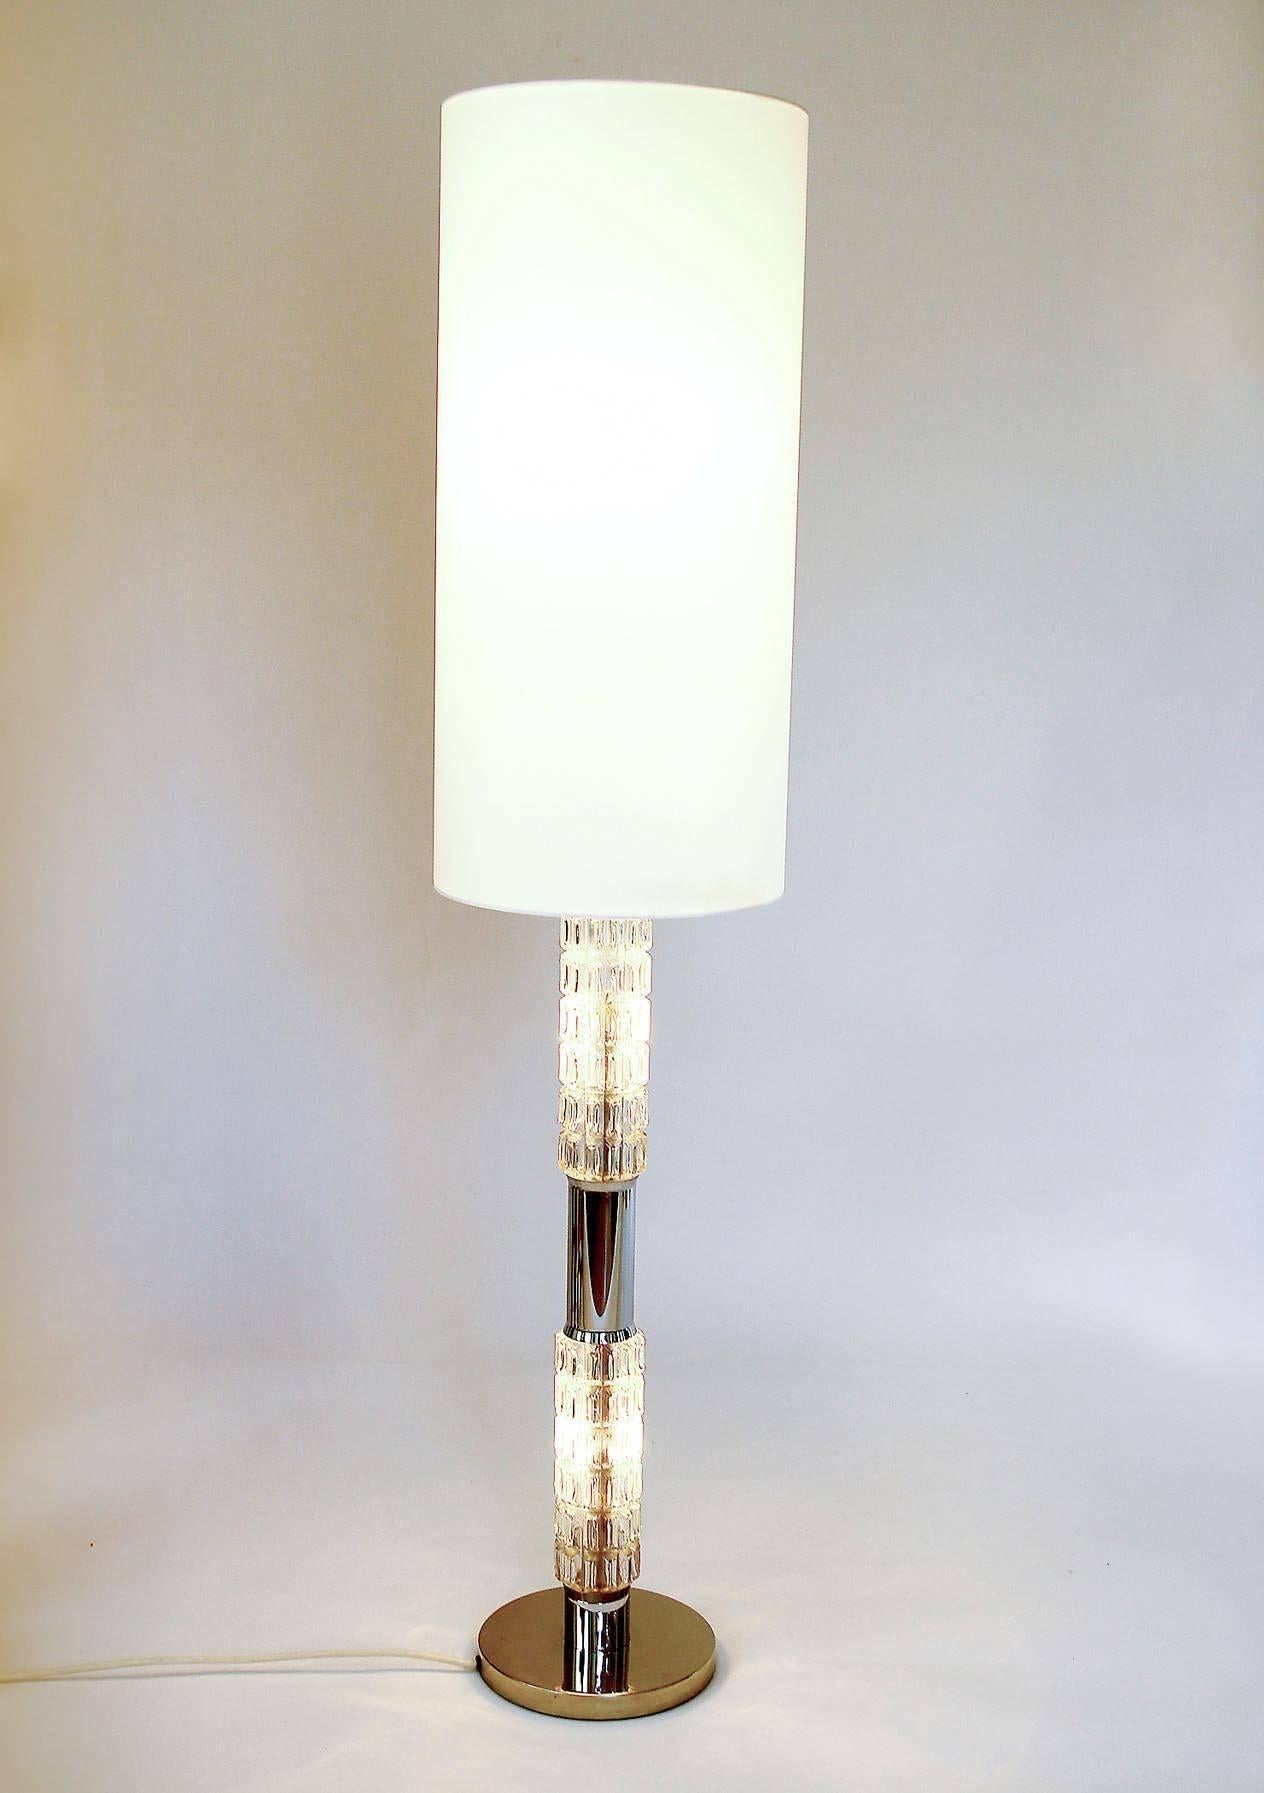 German Richard Essig Floor or Table Lamp with Illuminated Glass Stand, 1970s For Sale